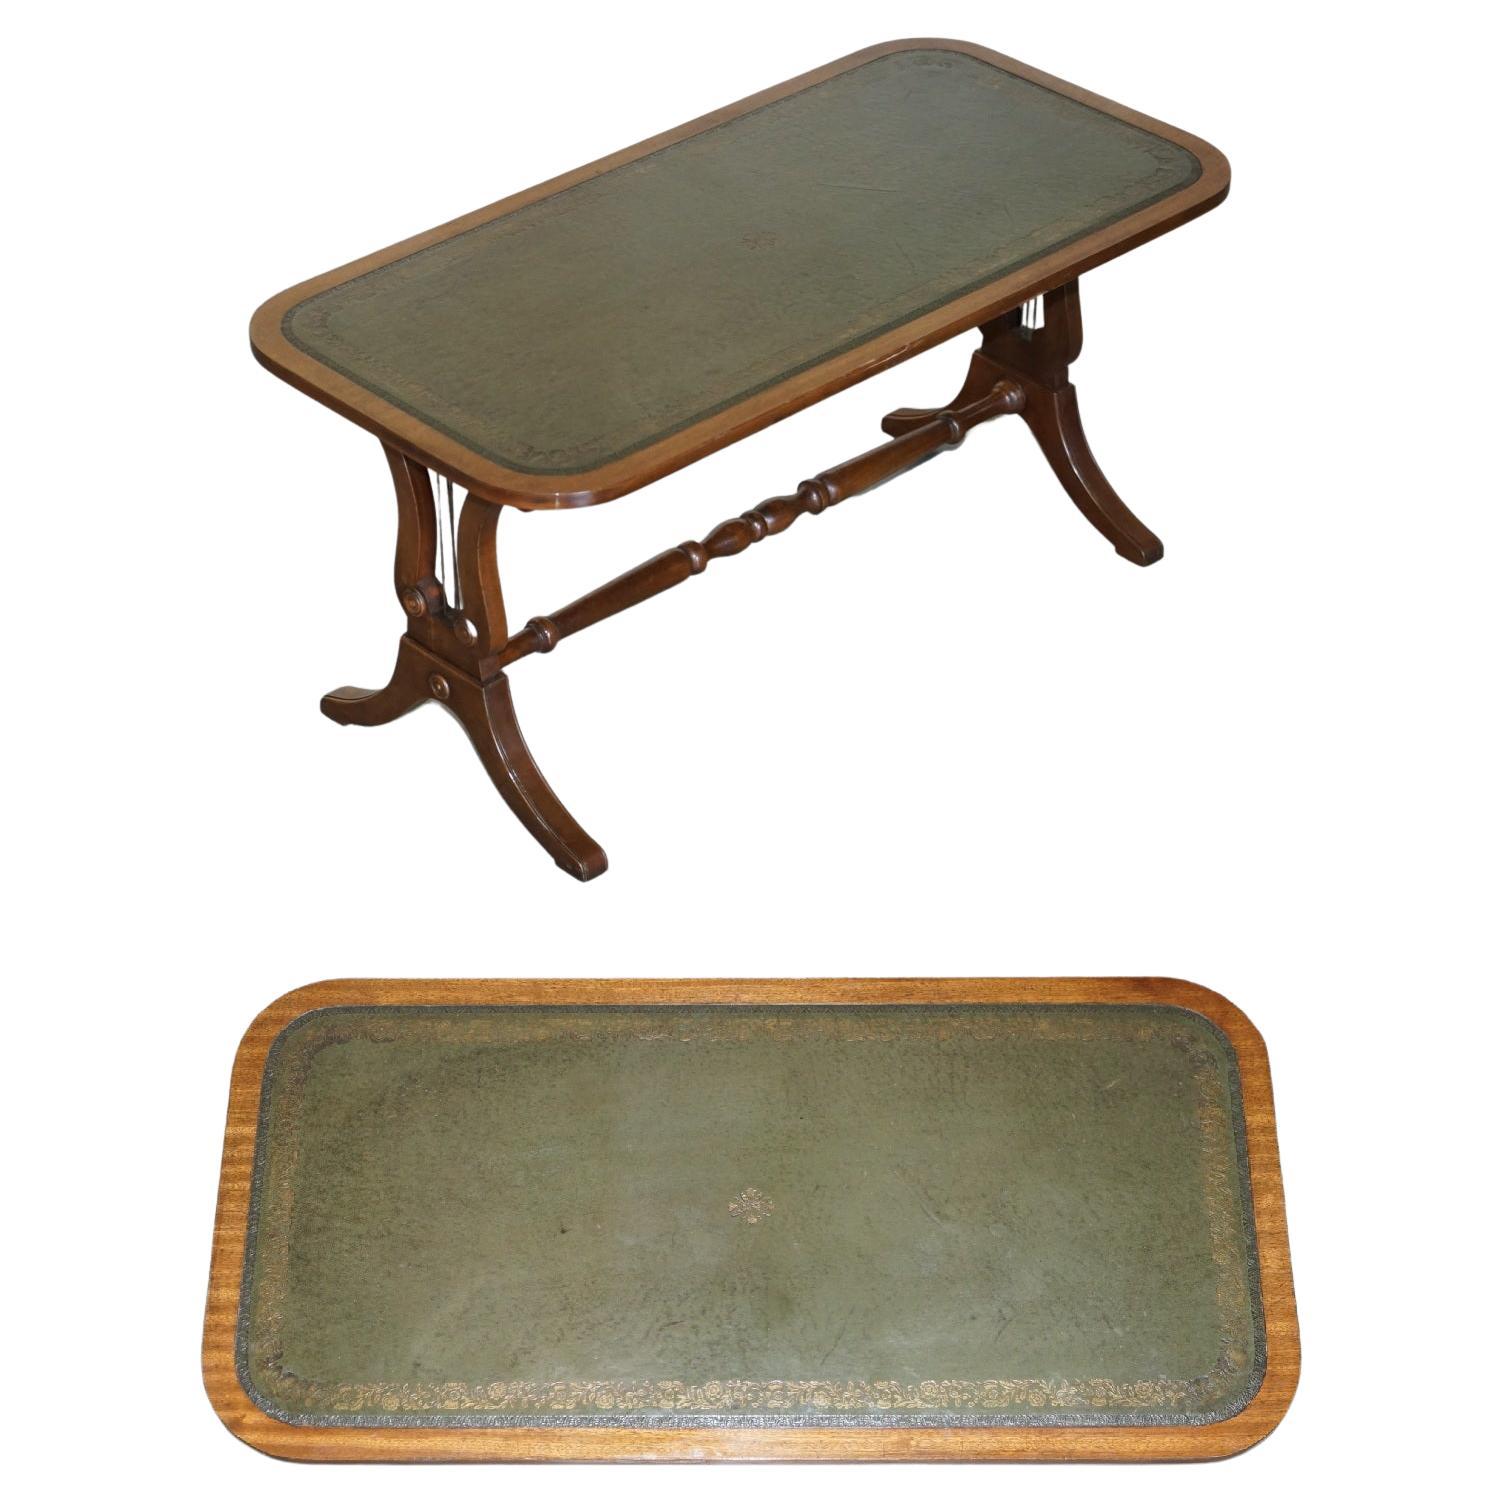 Medium Sized Green Leather & Hardwood Bevan Funnell Coffee Table Nice Patina For Sale